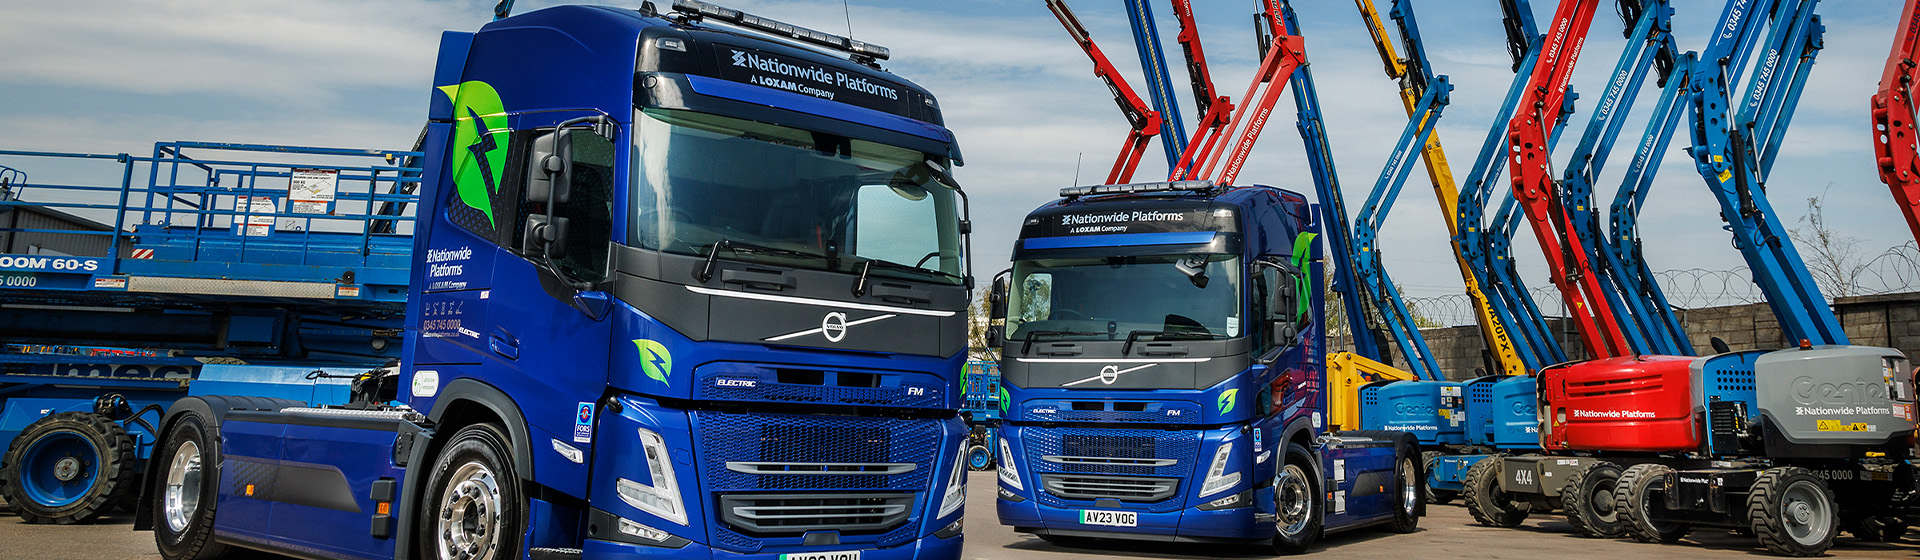 Nationwide Platforms raises the bar with UK’s first Volvo FM electric pairing